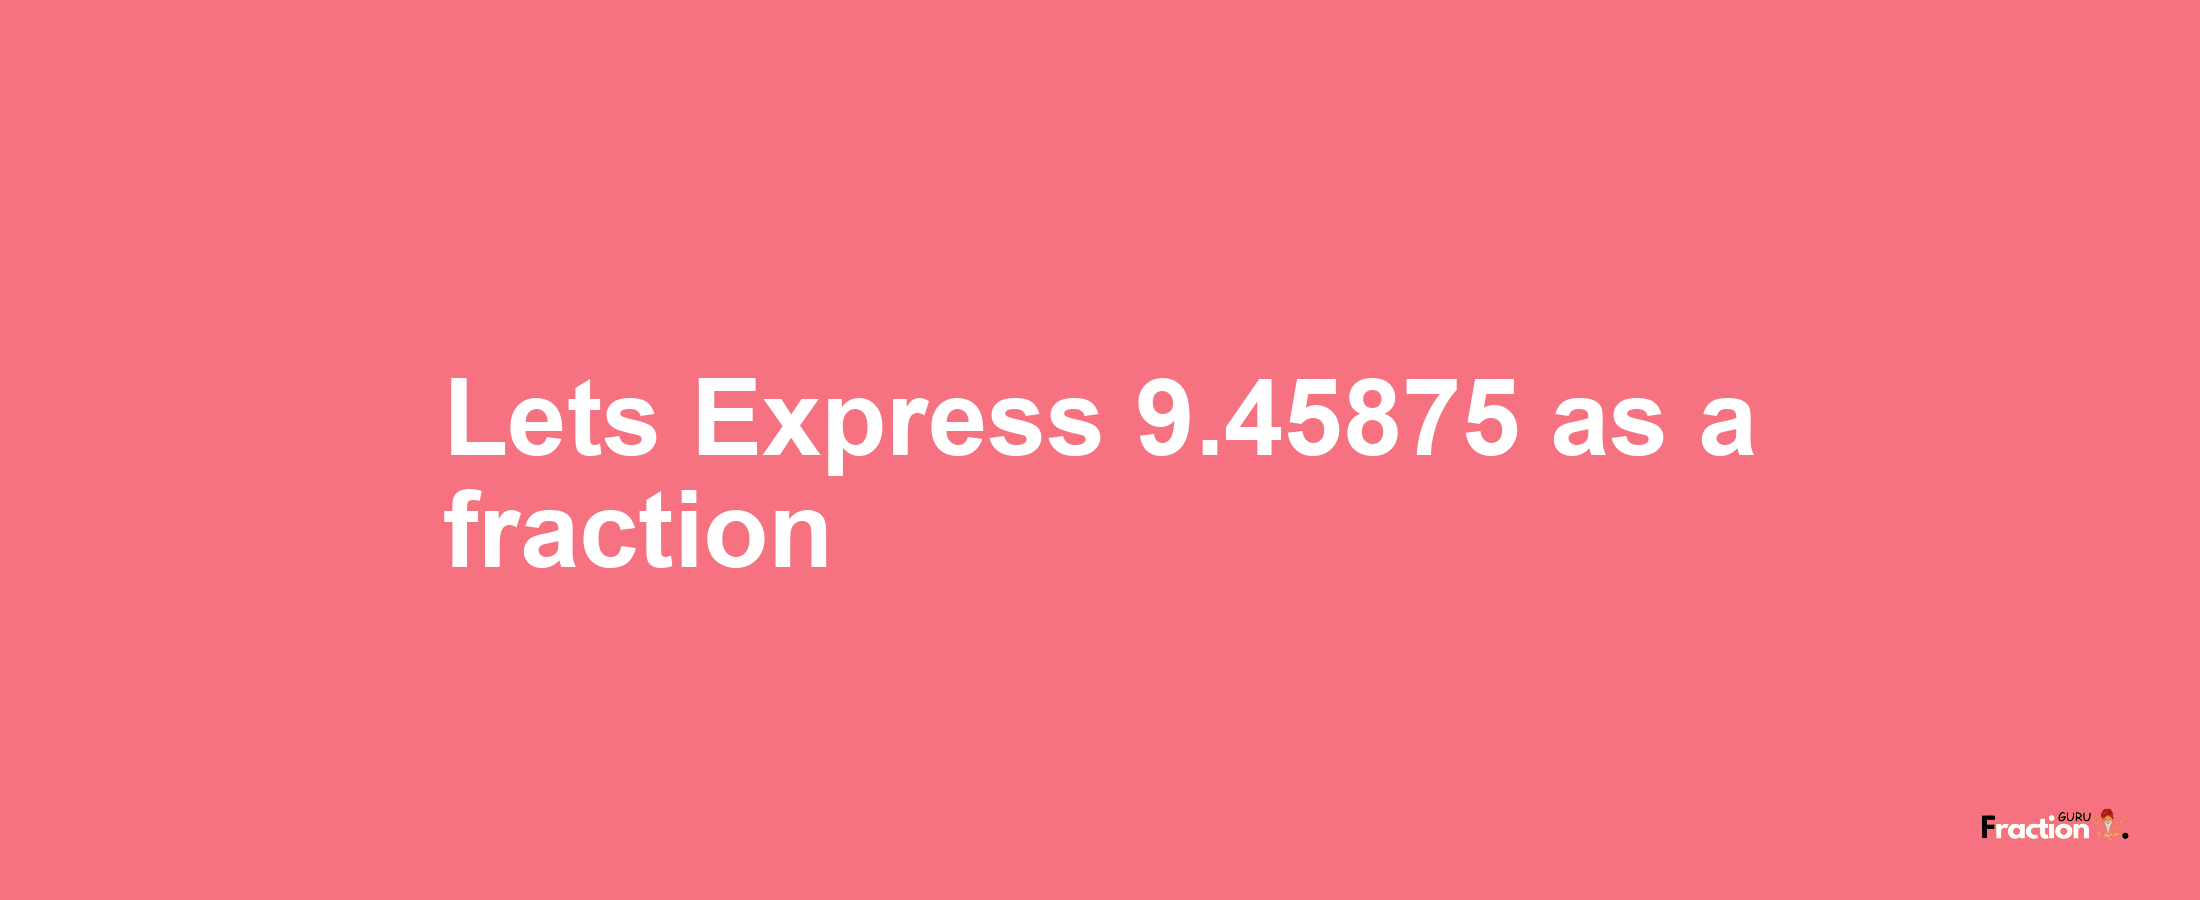 Lets Express 9.45875 as afraction